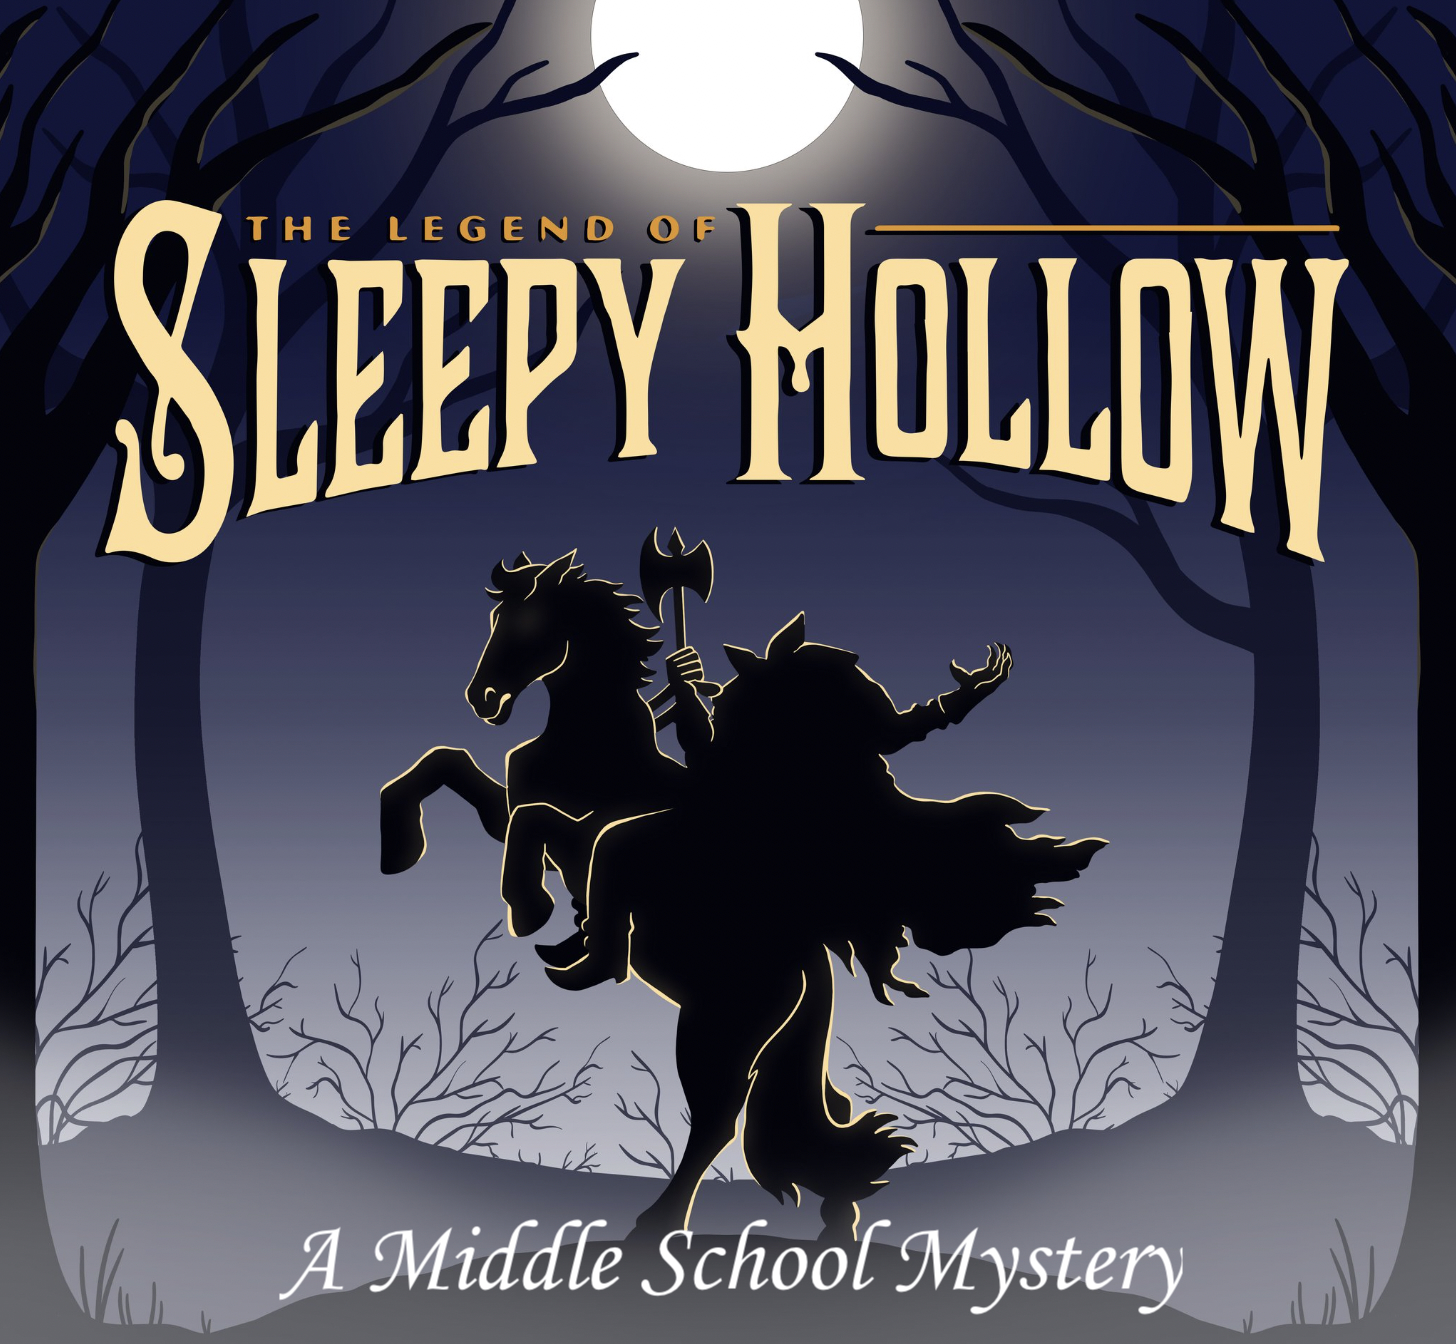 The Legend of Sleepy Hollow – A Middle School Mystery